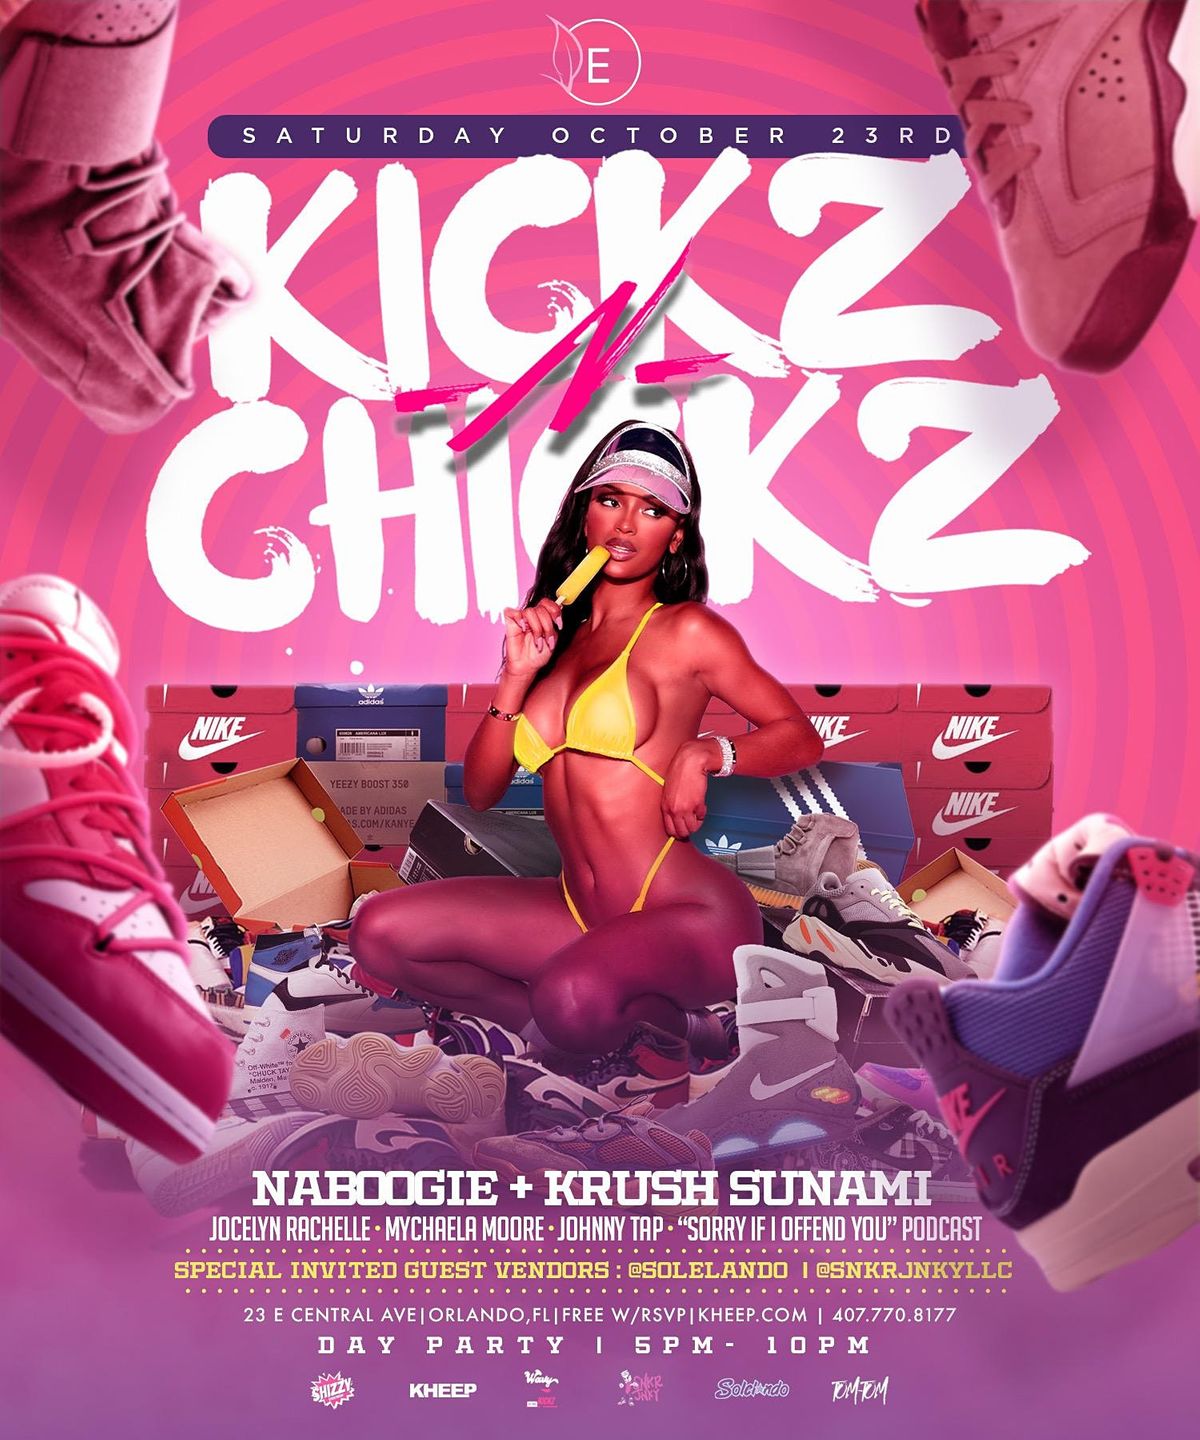 KICKS N CHICKS THE DAY PARTY